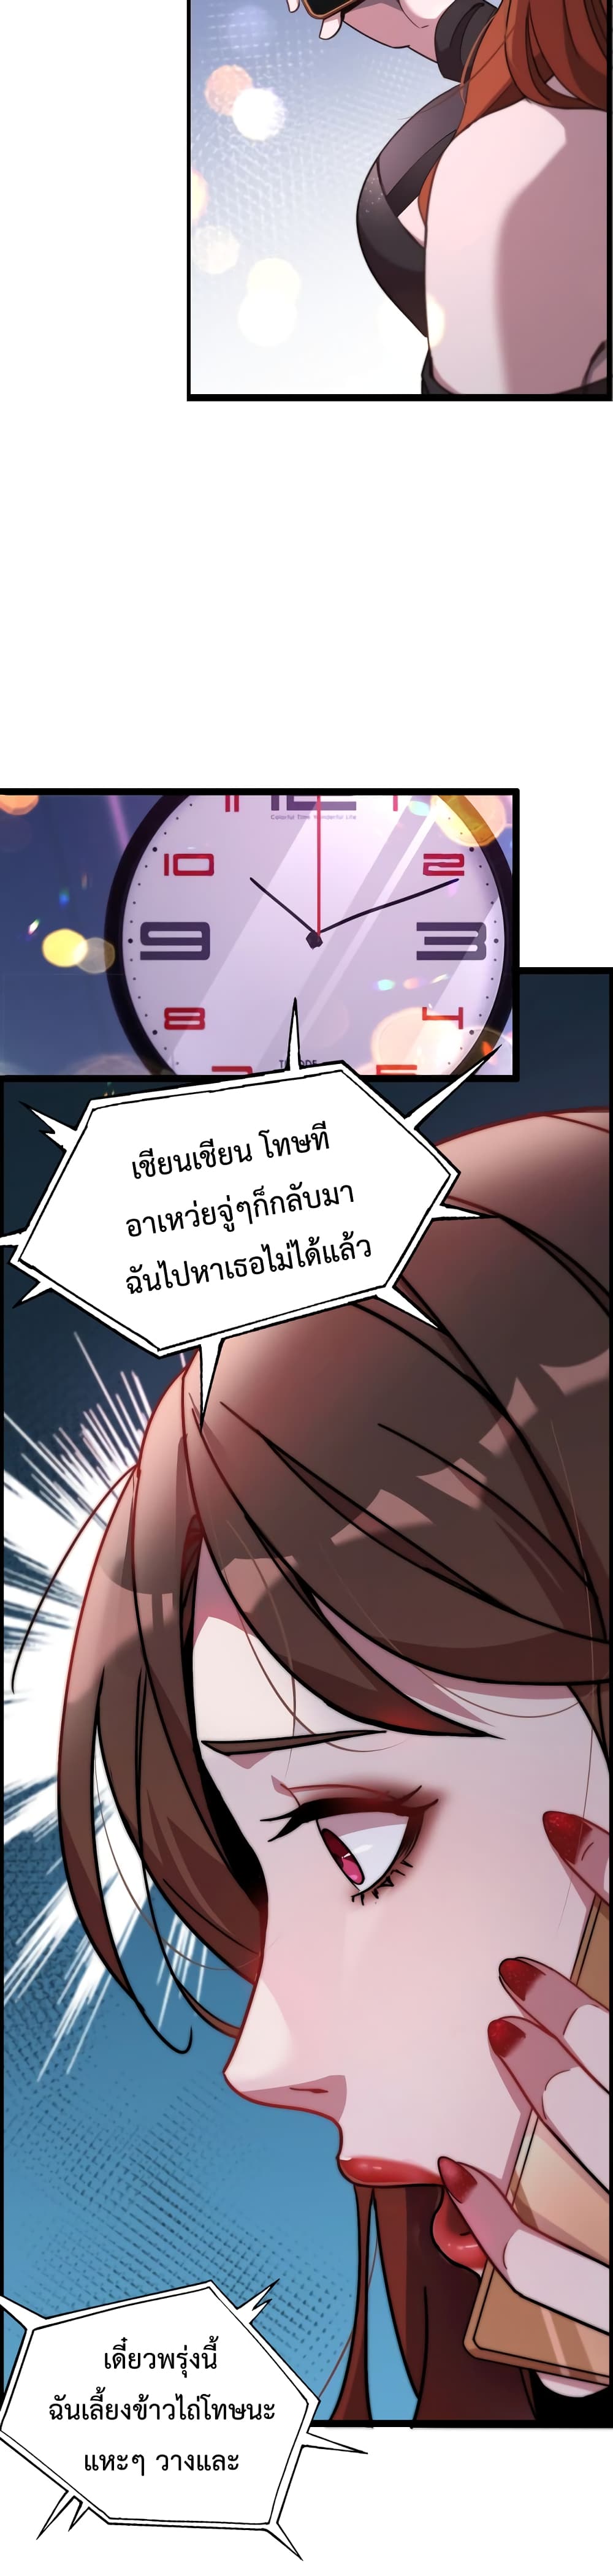 I’m Stuck on the Same Day for a Thousand Years ตอนที่ 1 28